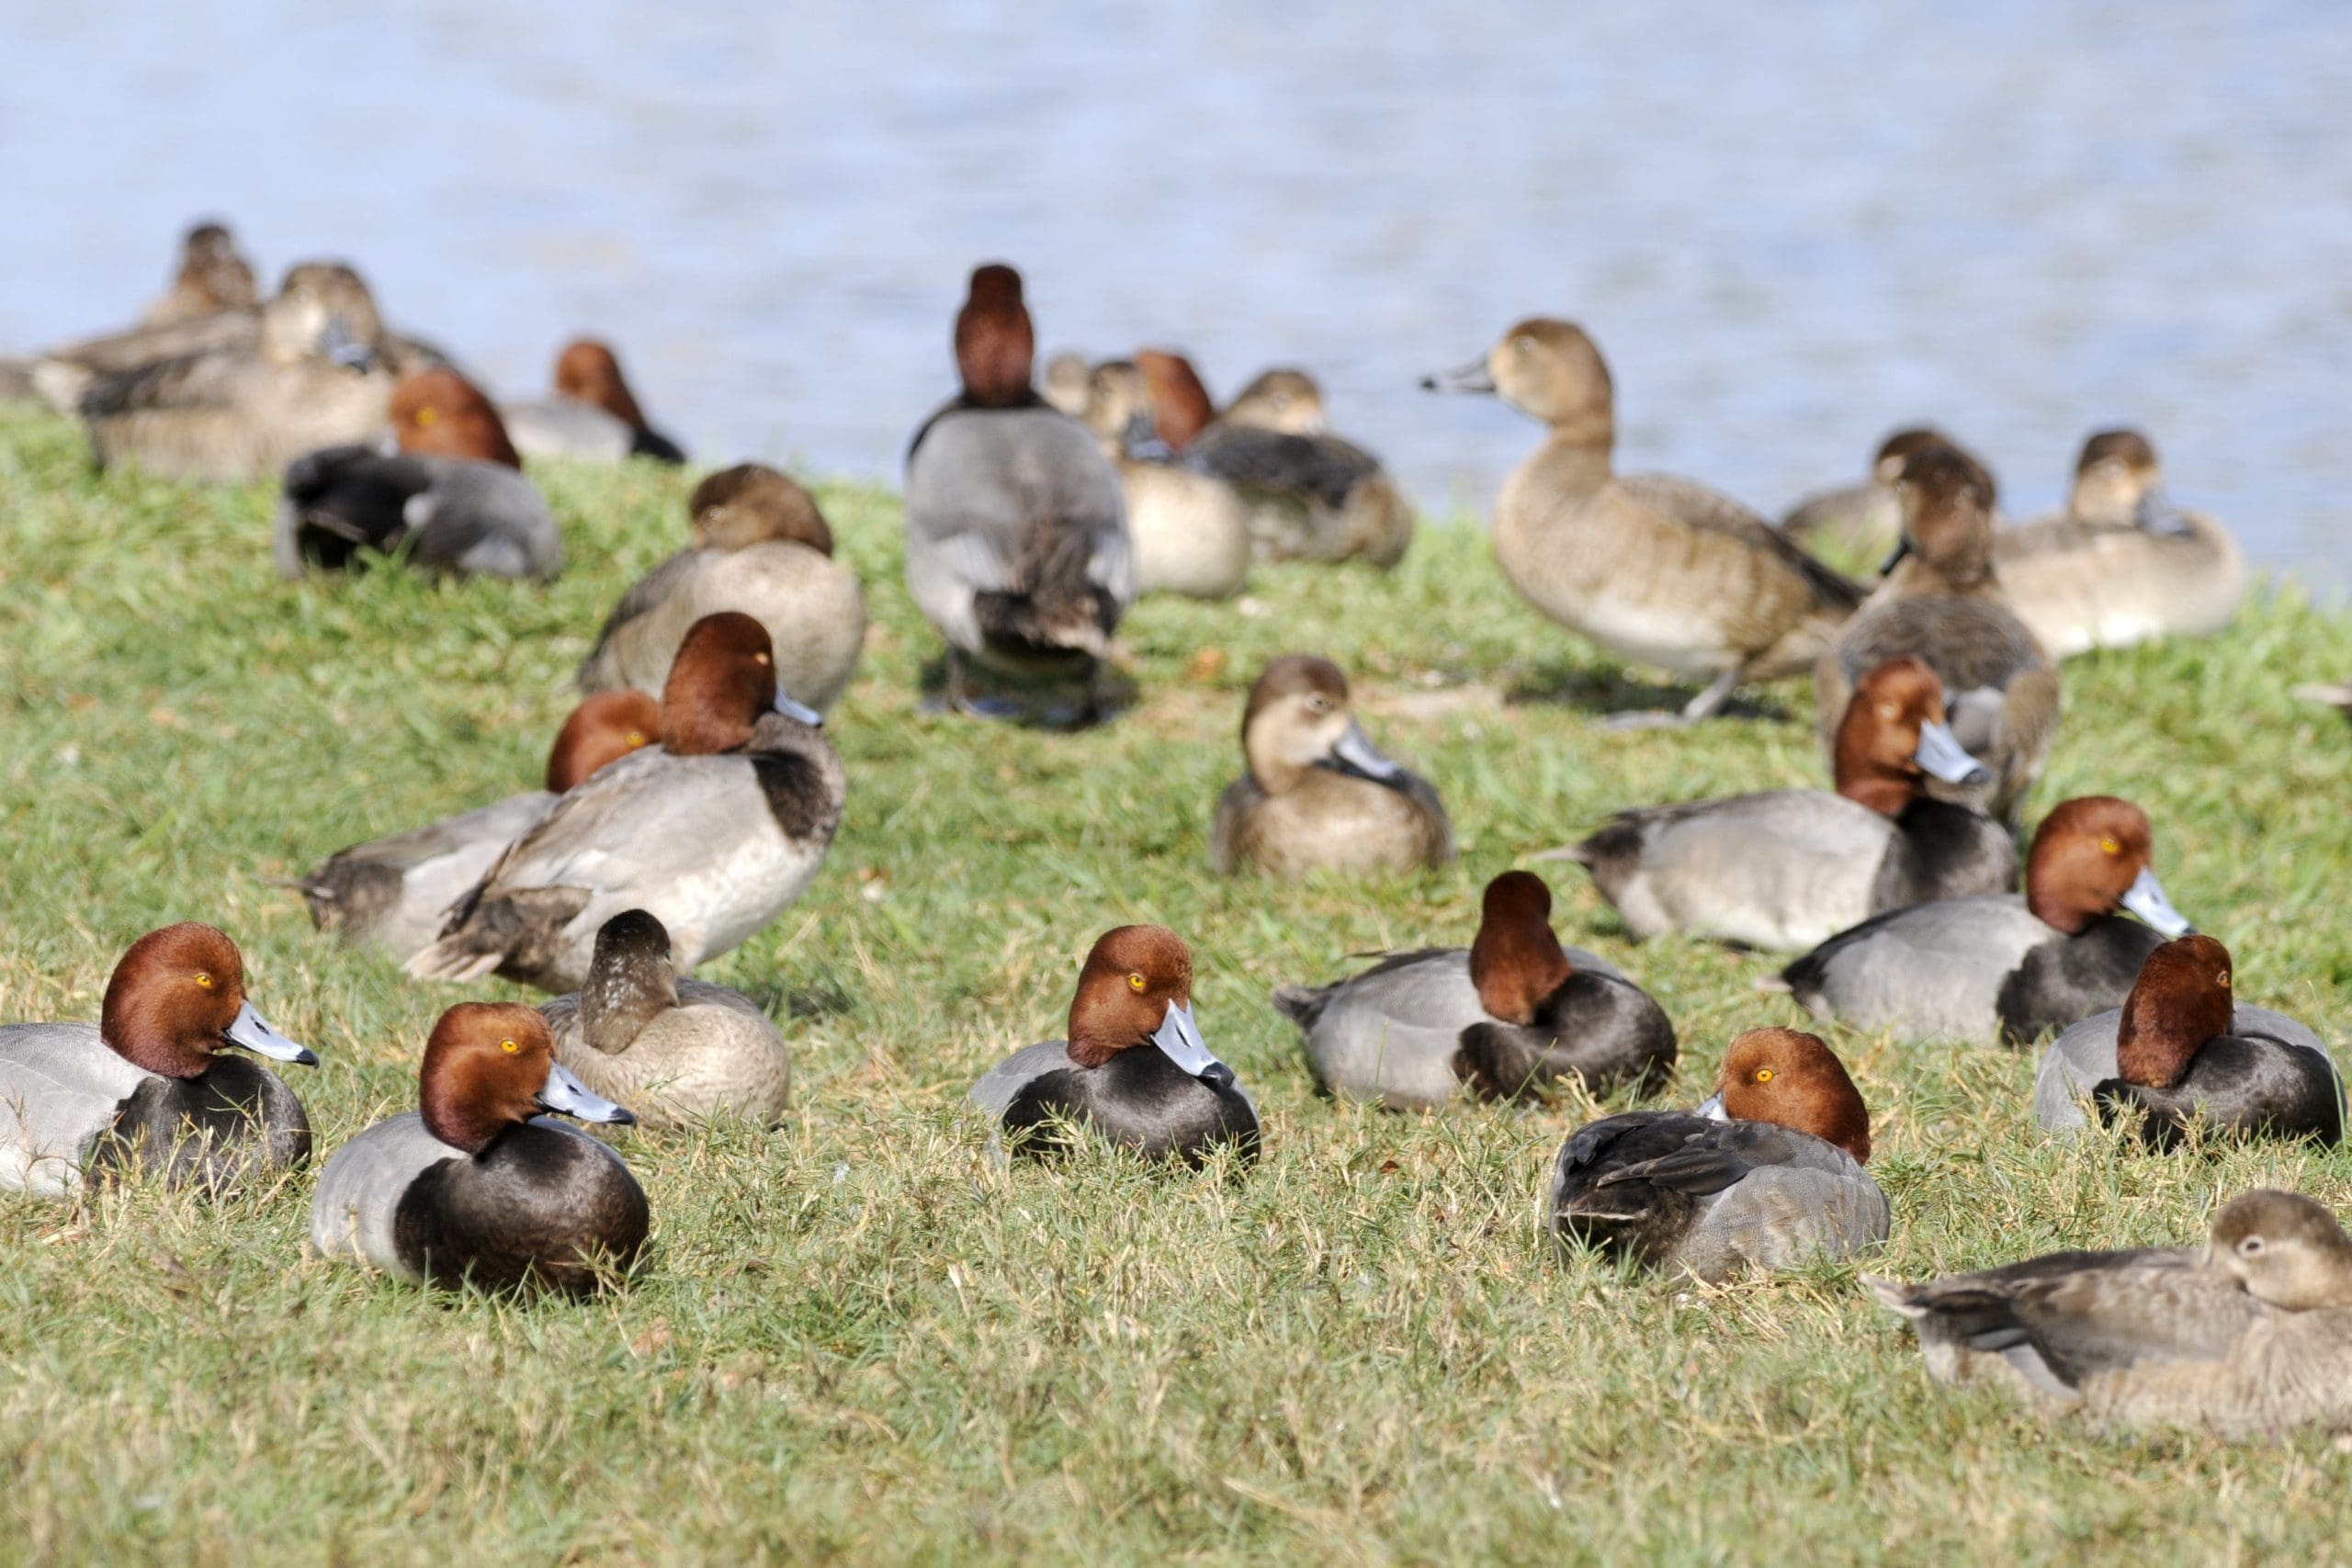 Congregation of redheads species, loafing on grass.